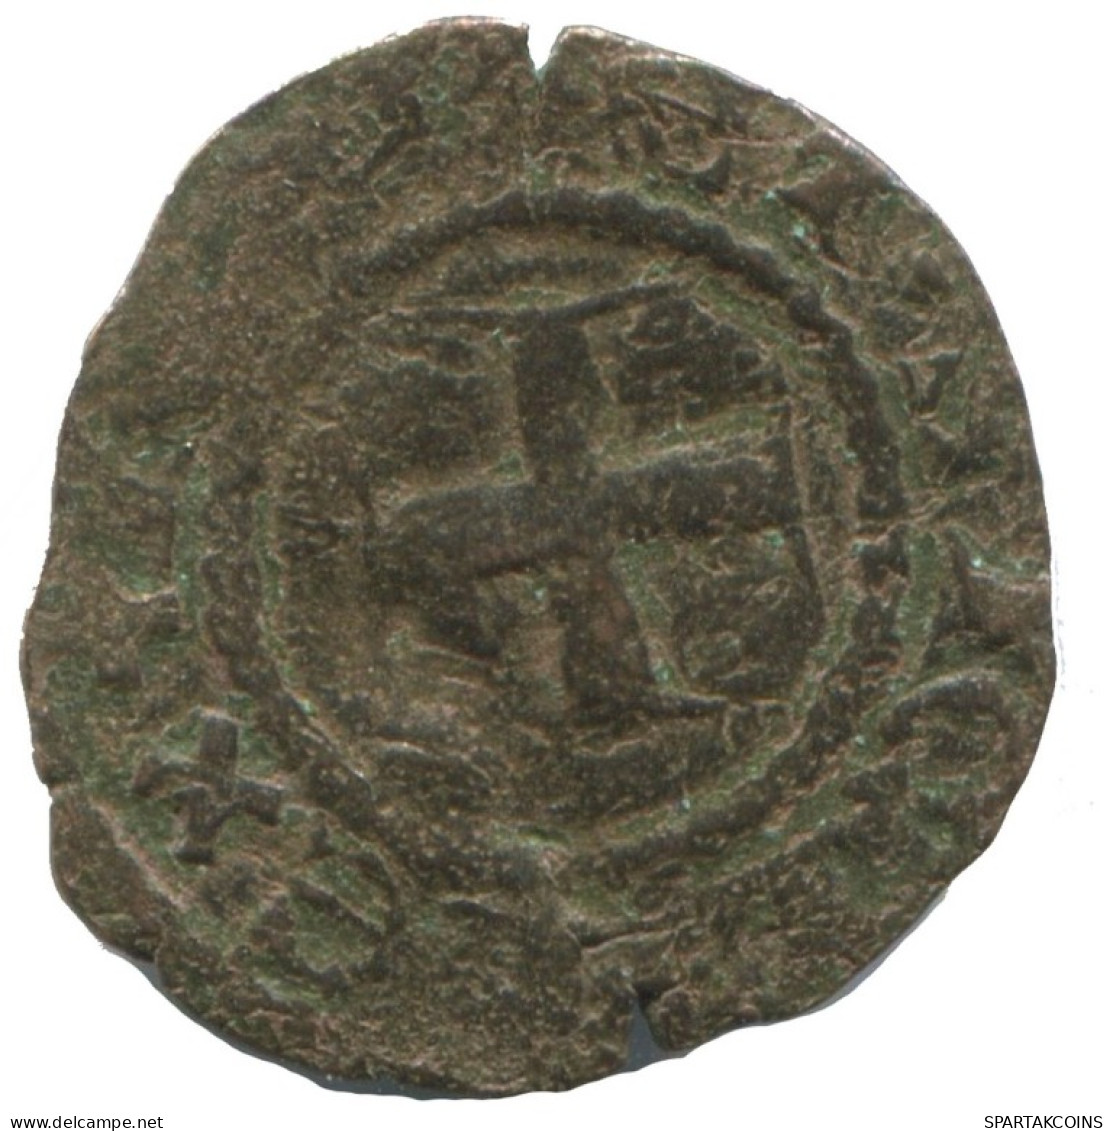 Authentic Original MEDIEVAL EUROPEAN Coin 1.3g/15mm #AC275.8.E.A - Other - Europe